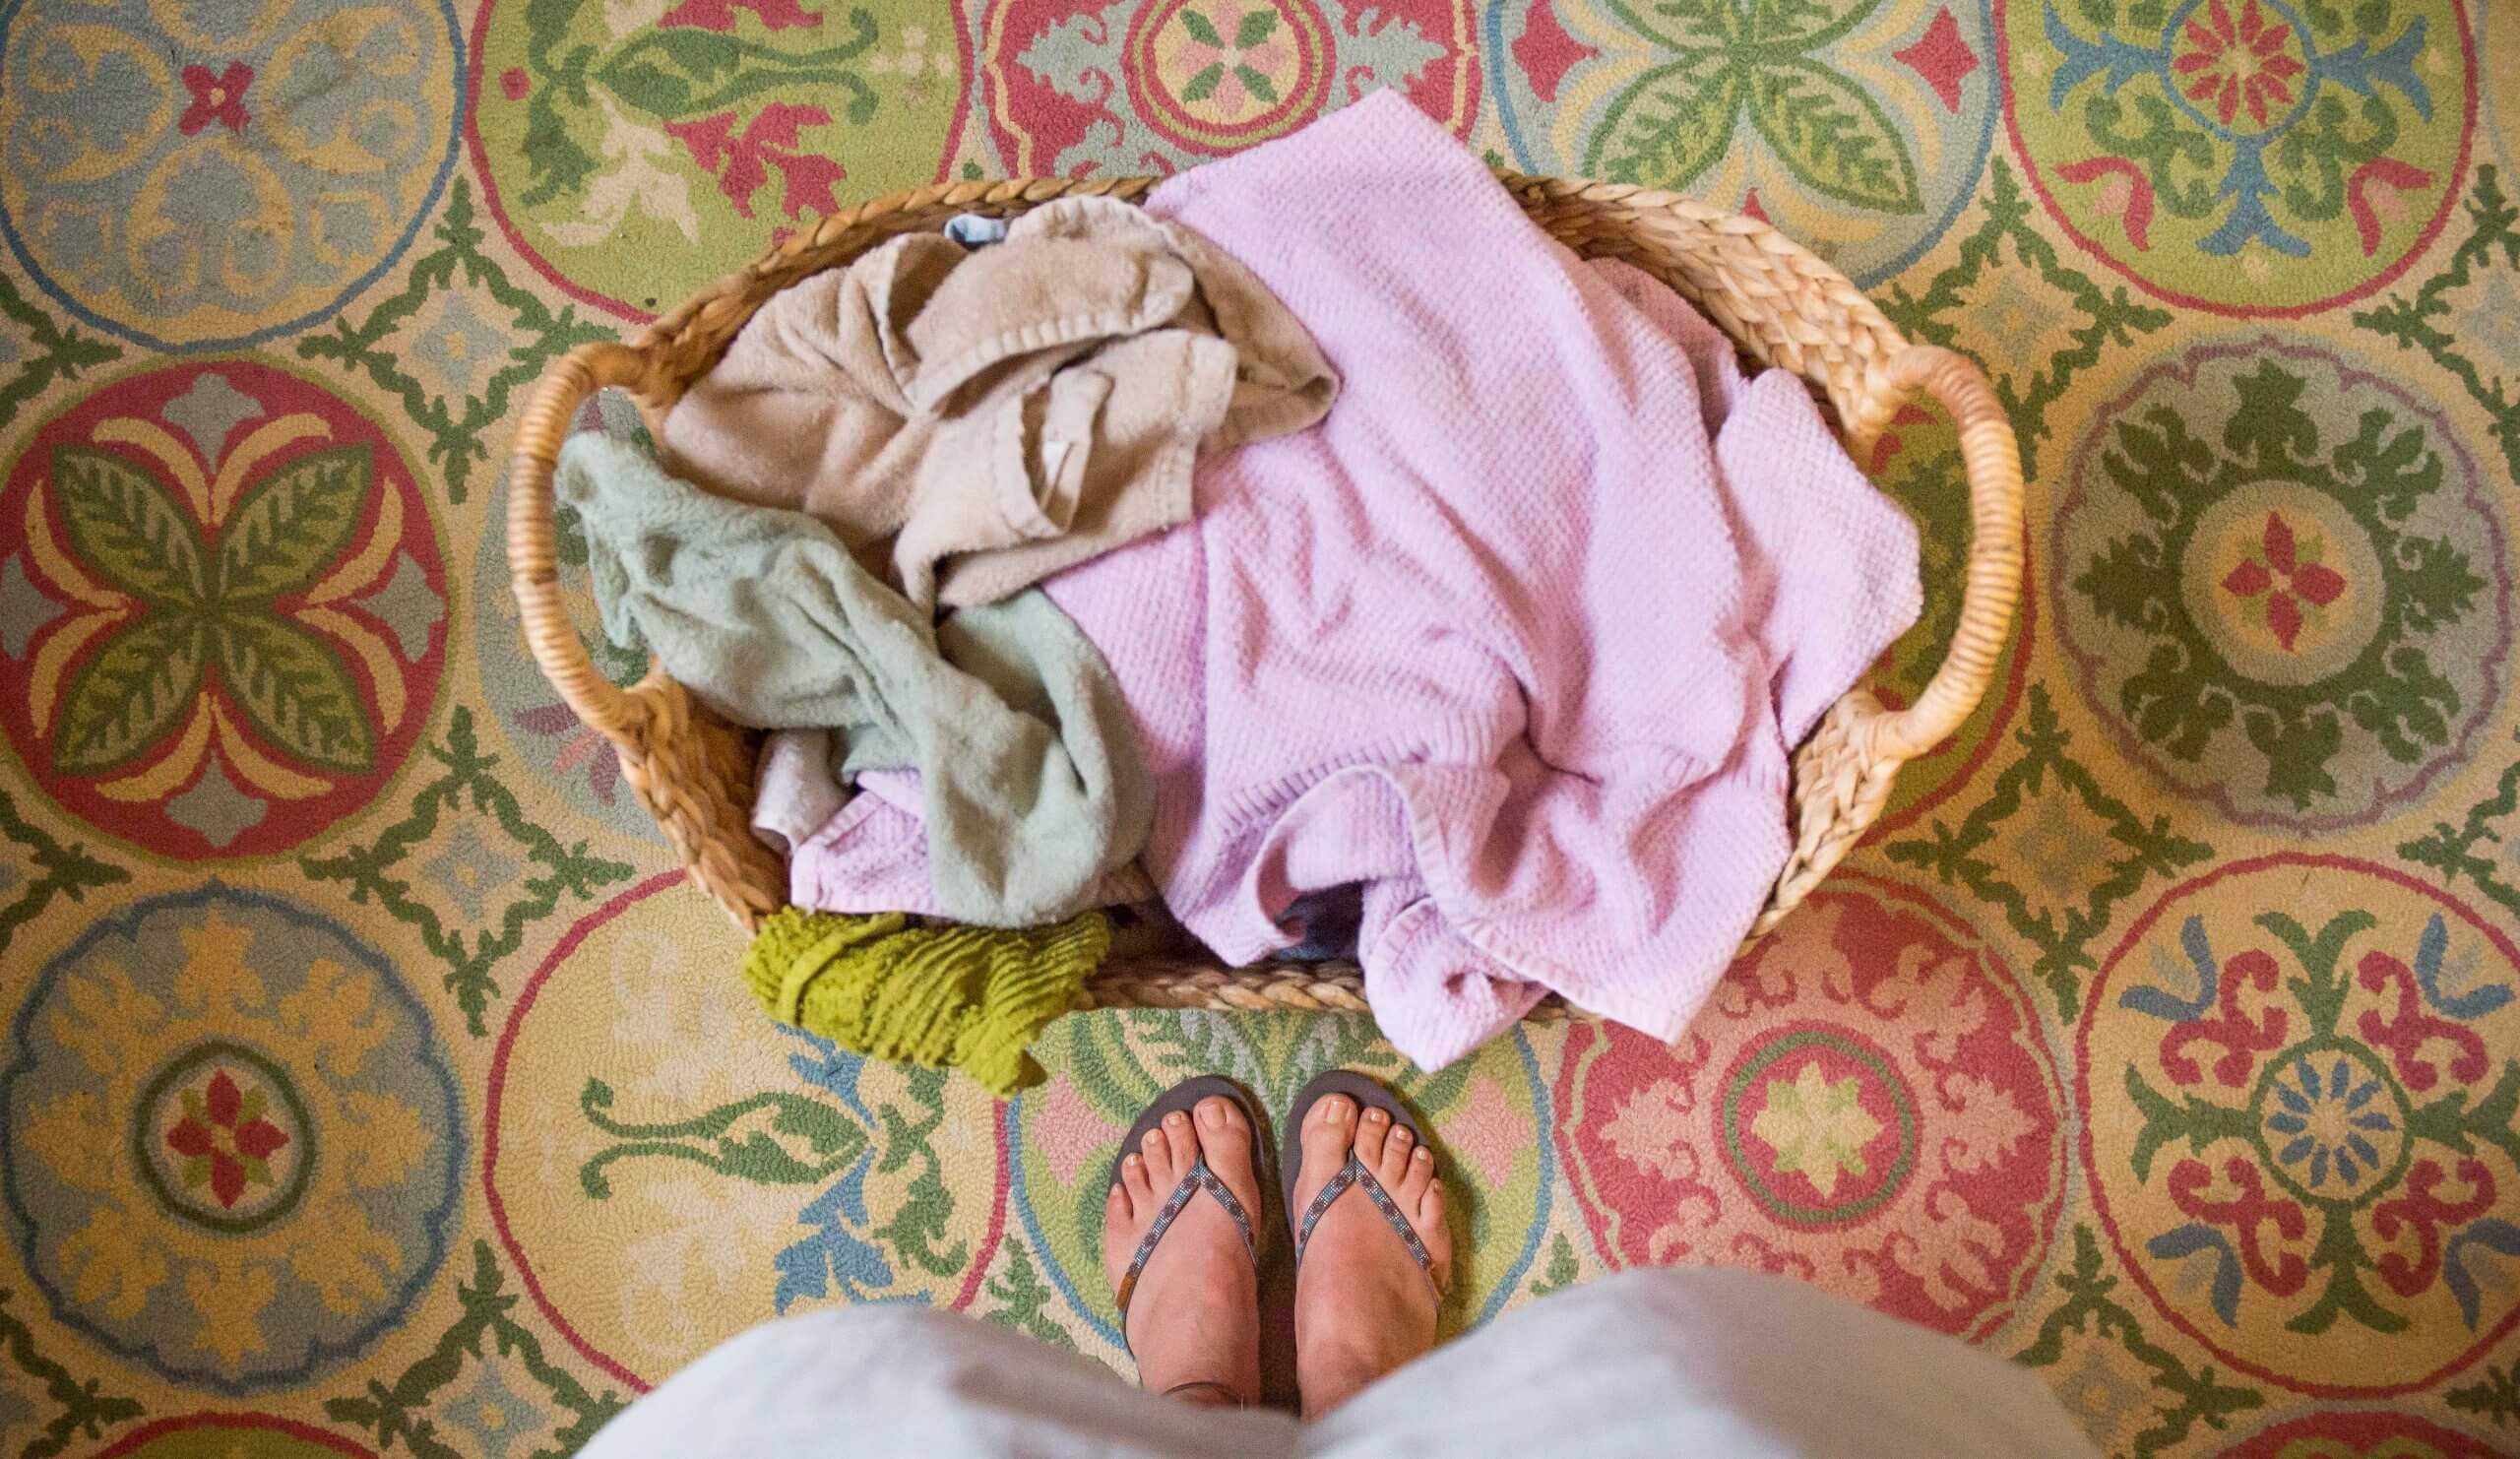 A basket of laundry is shown parallel to a person's feet. The person is standing beside the basket.